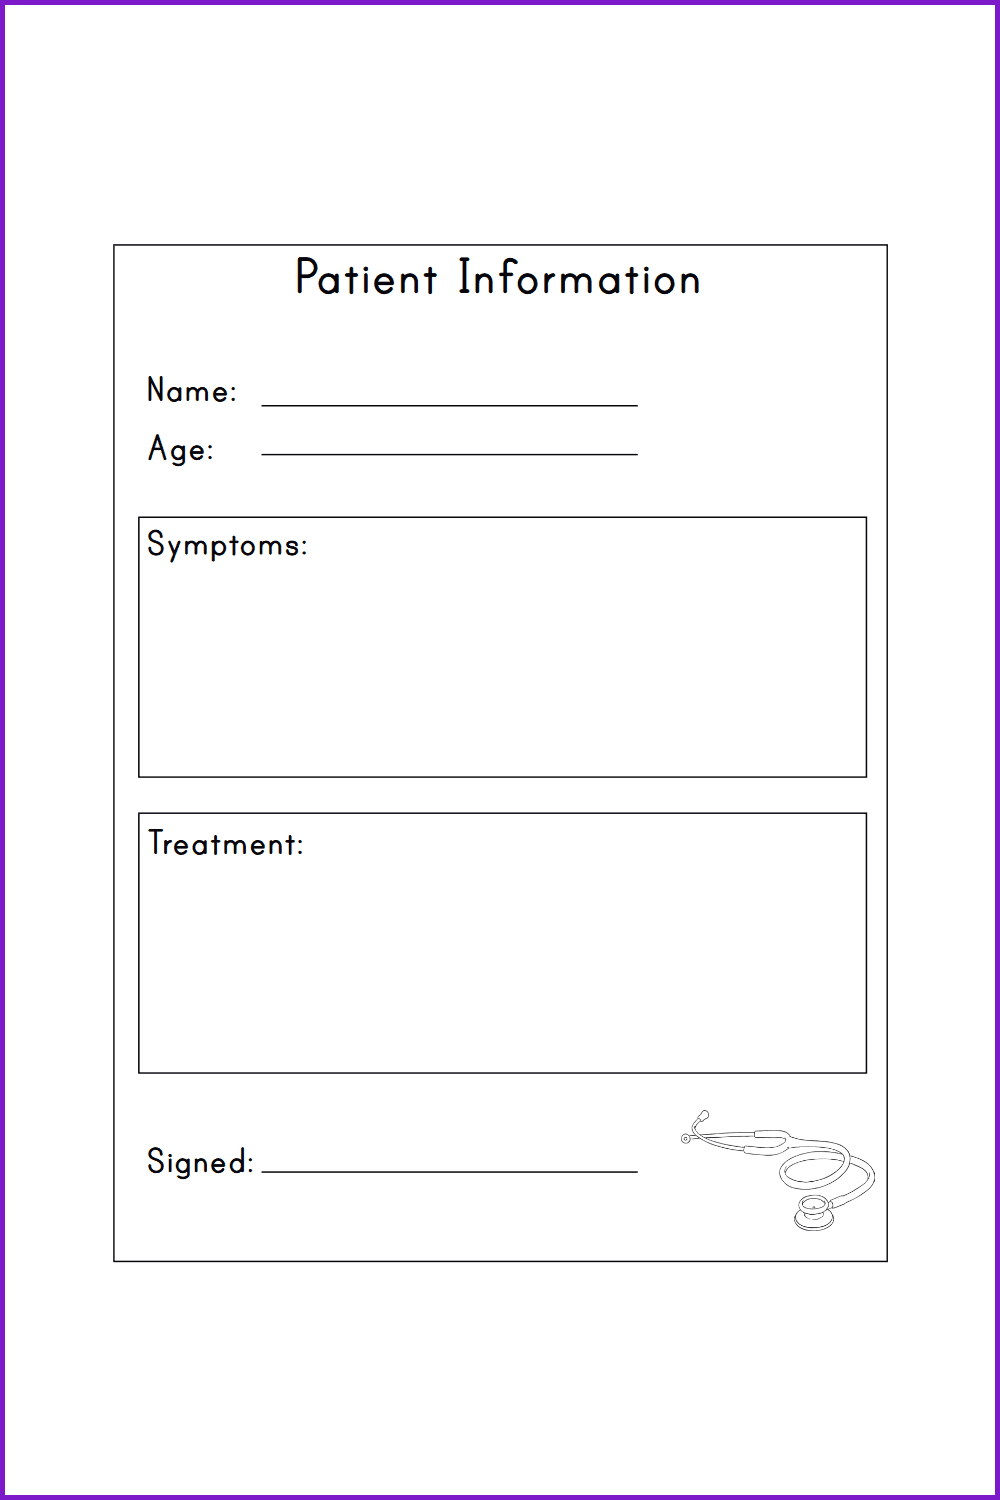 A minimalist DR Note template.